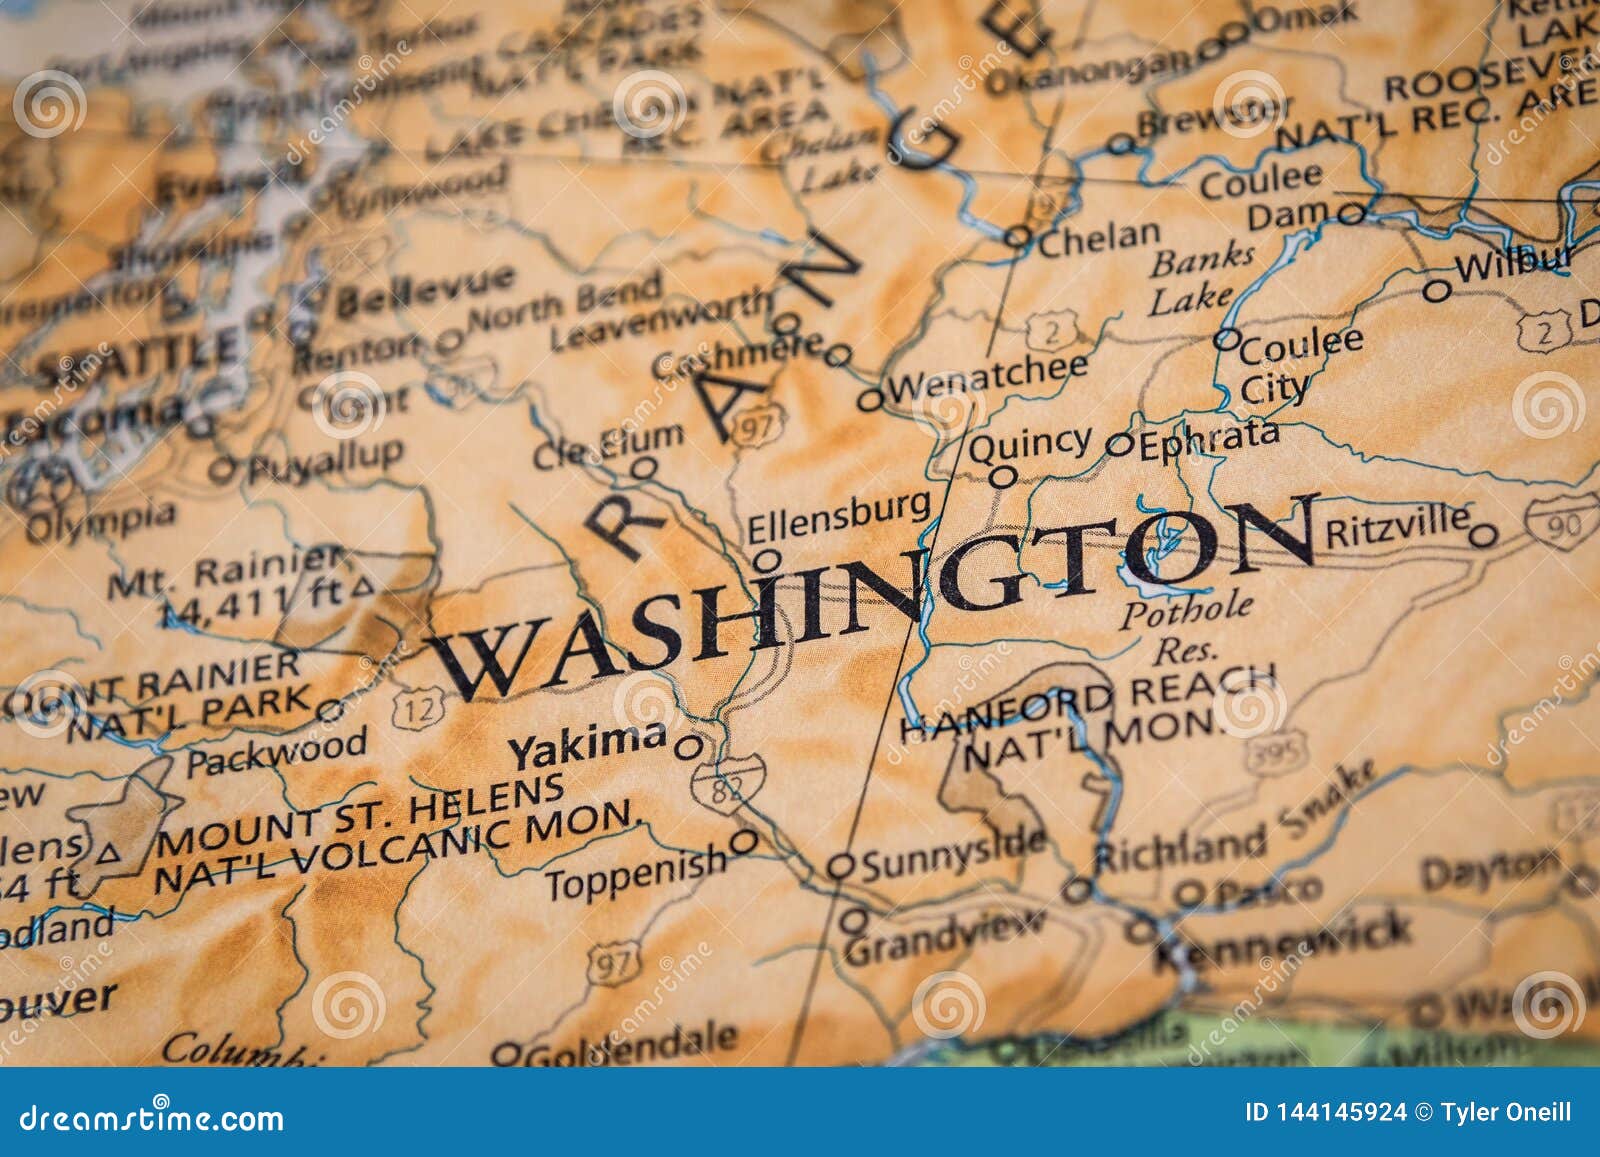 selective focus of washington state on a geographical and political state map of the usa